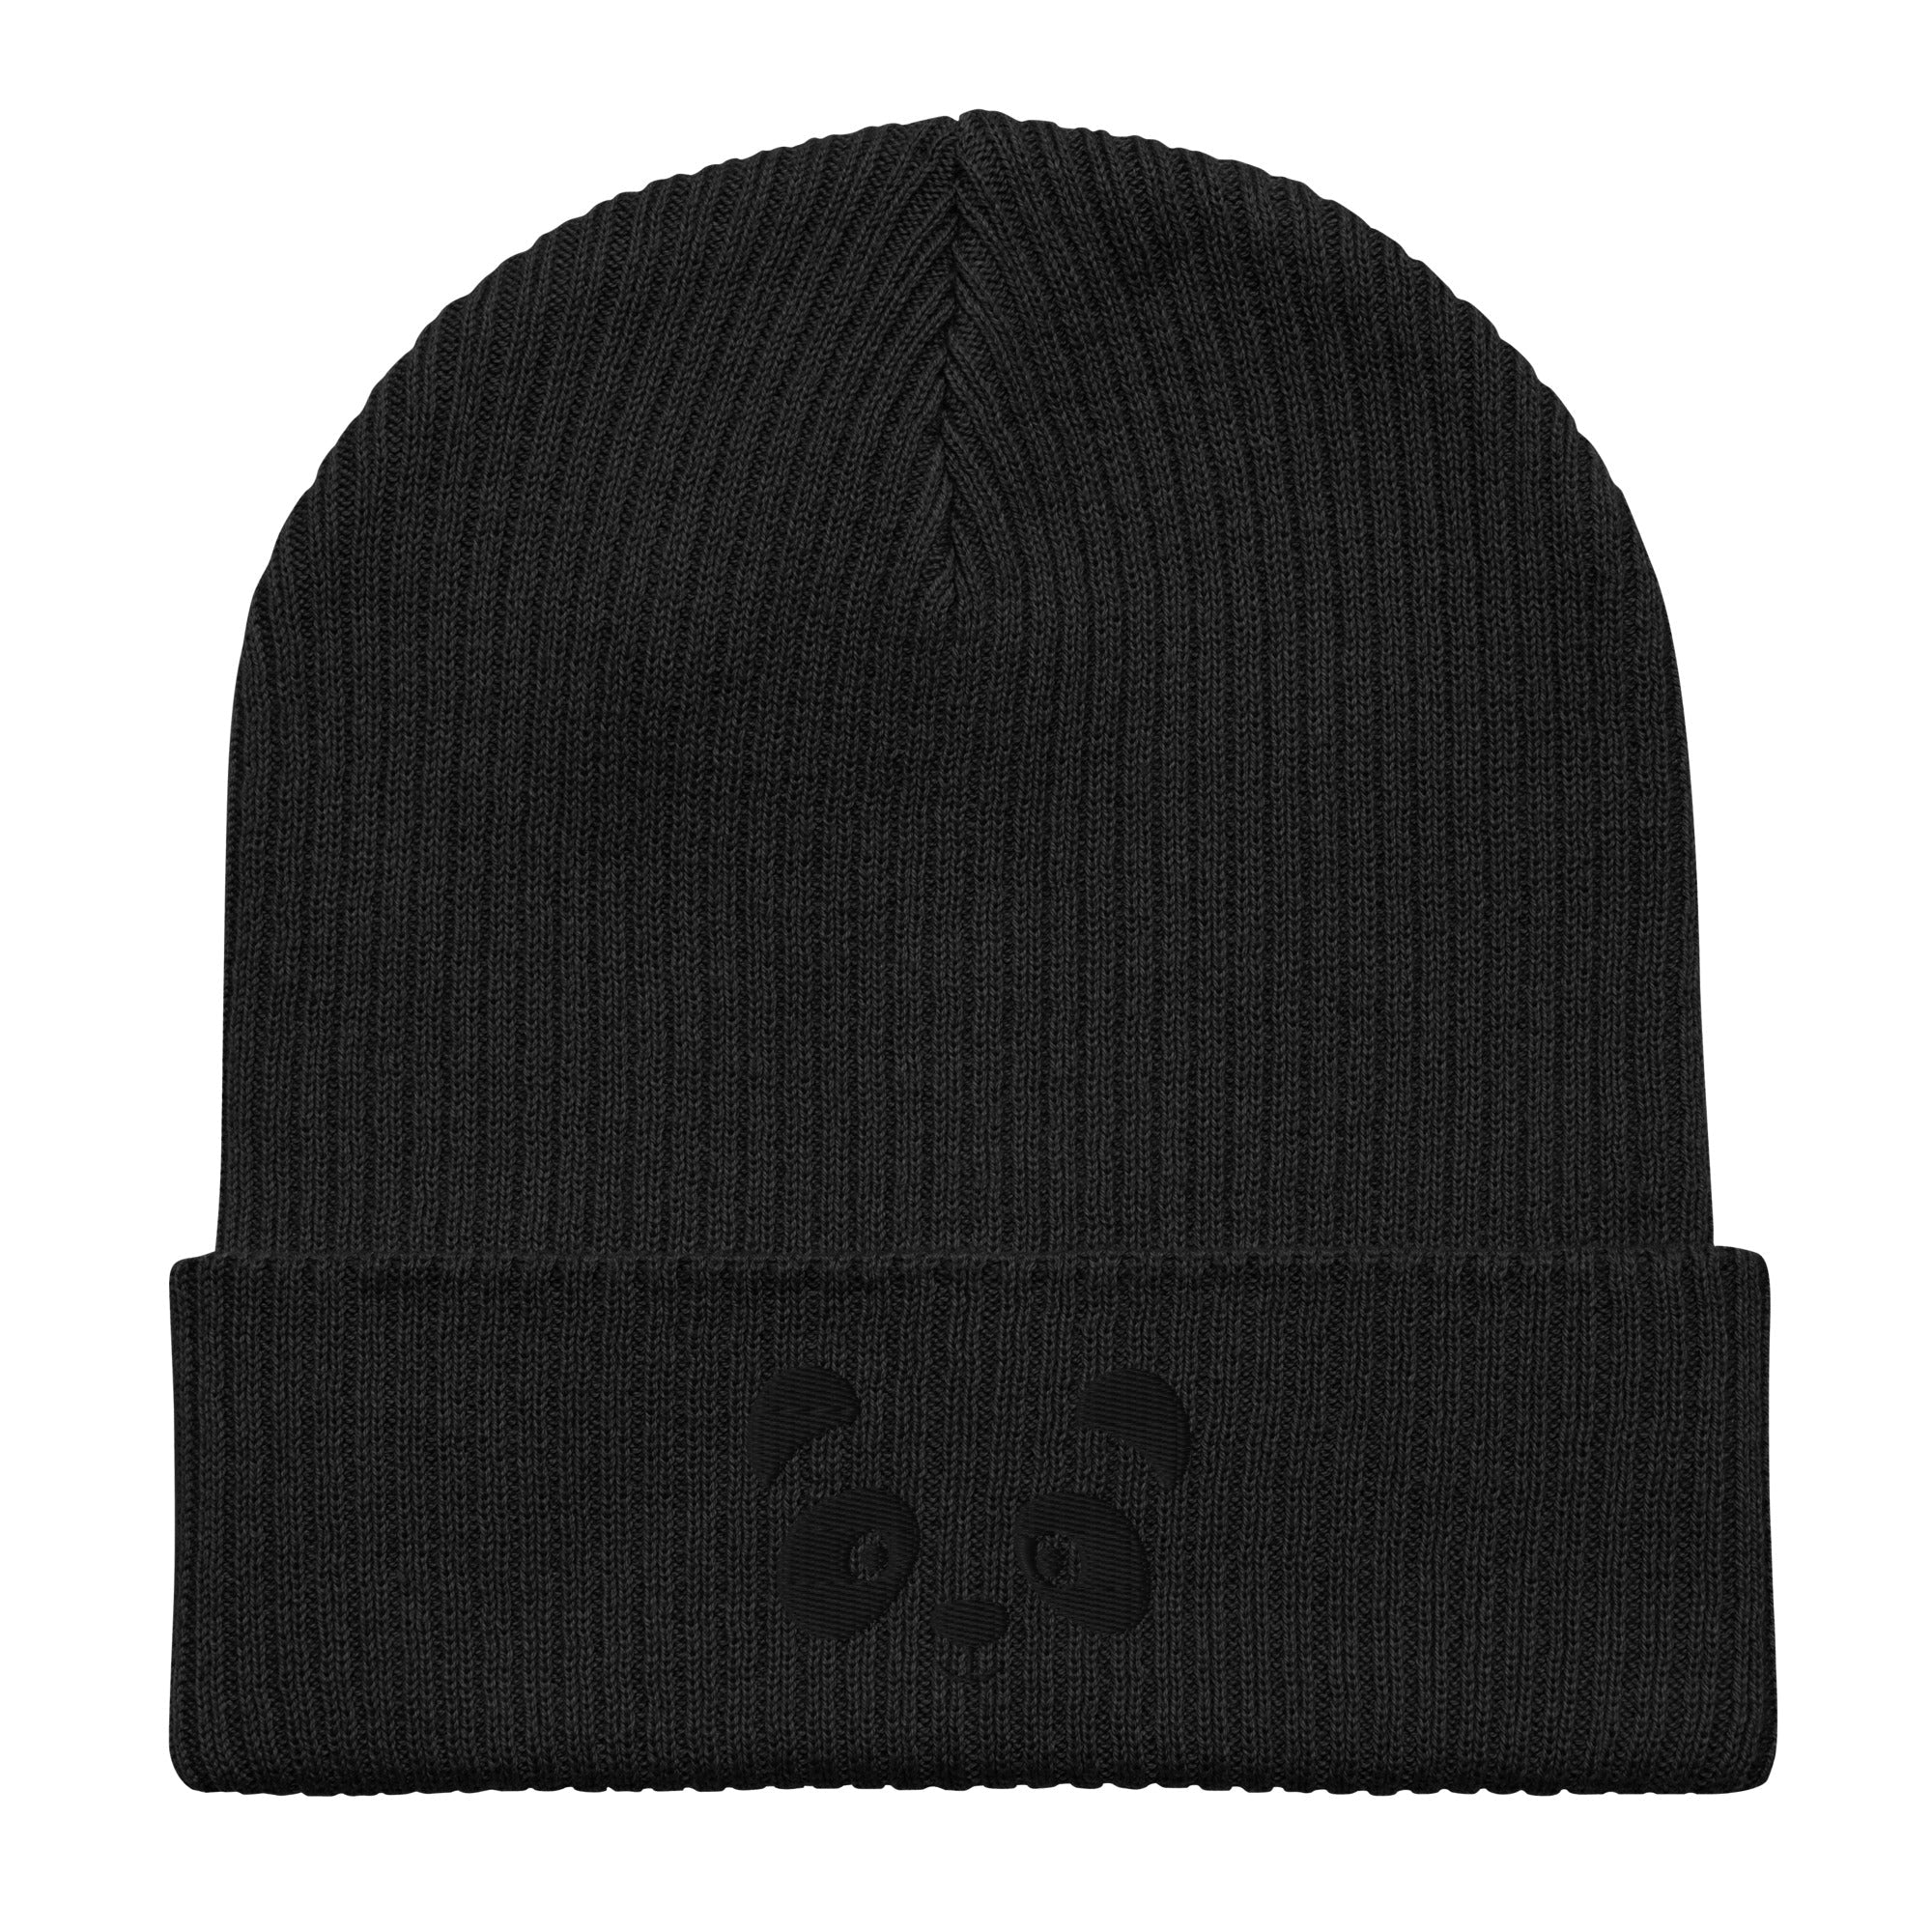 Panda face black embroidered, organic cotton ribbed beanie-16